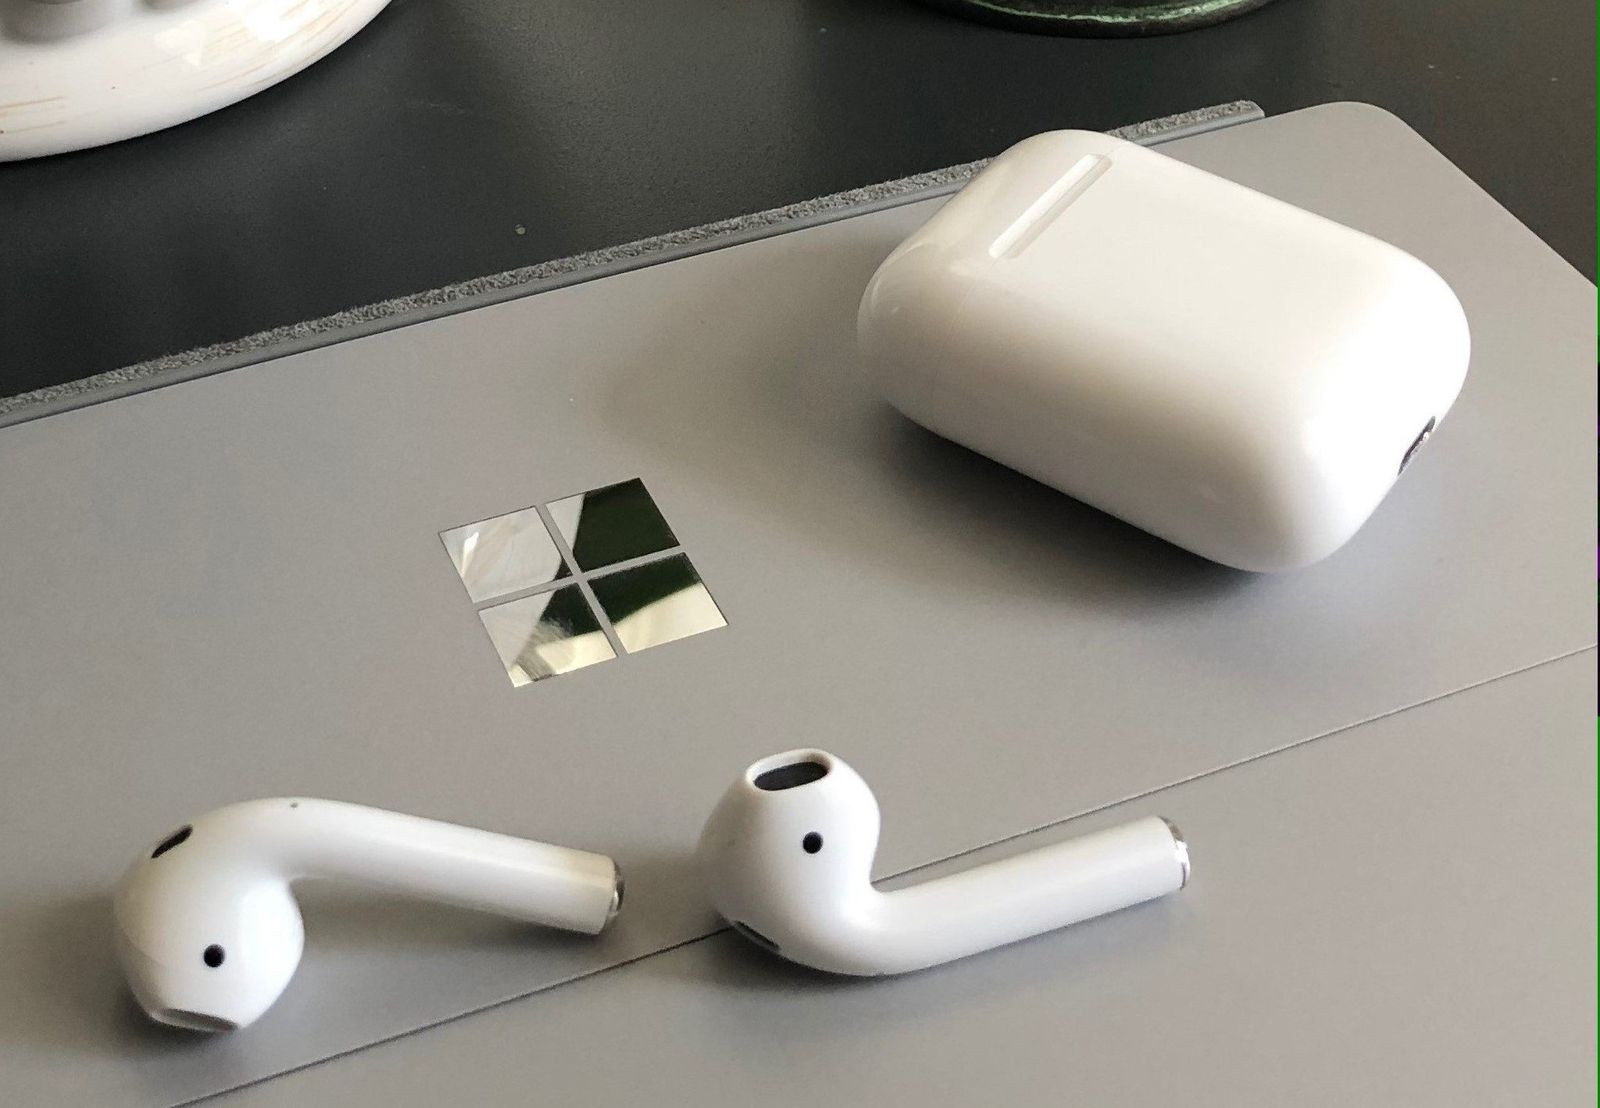 How to pair Apple AirPods with a Windows PC | Windows Central